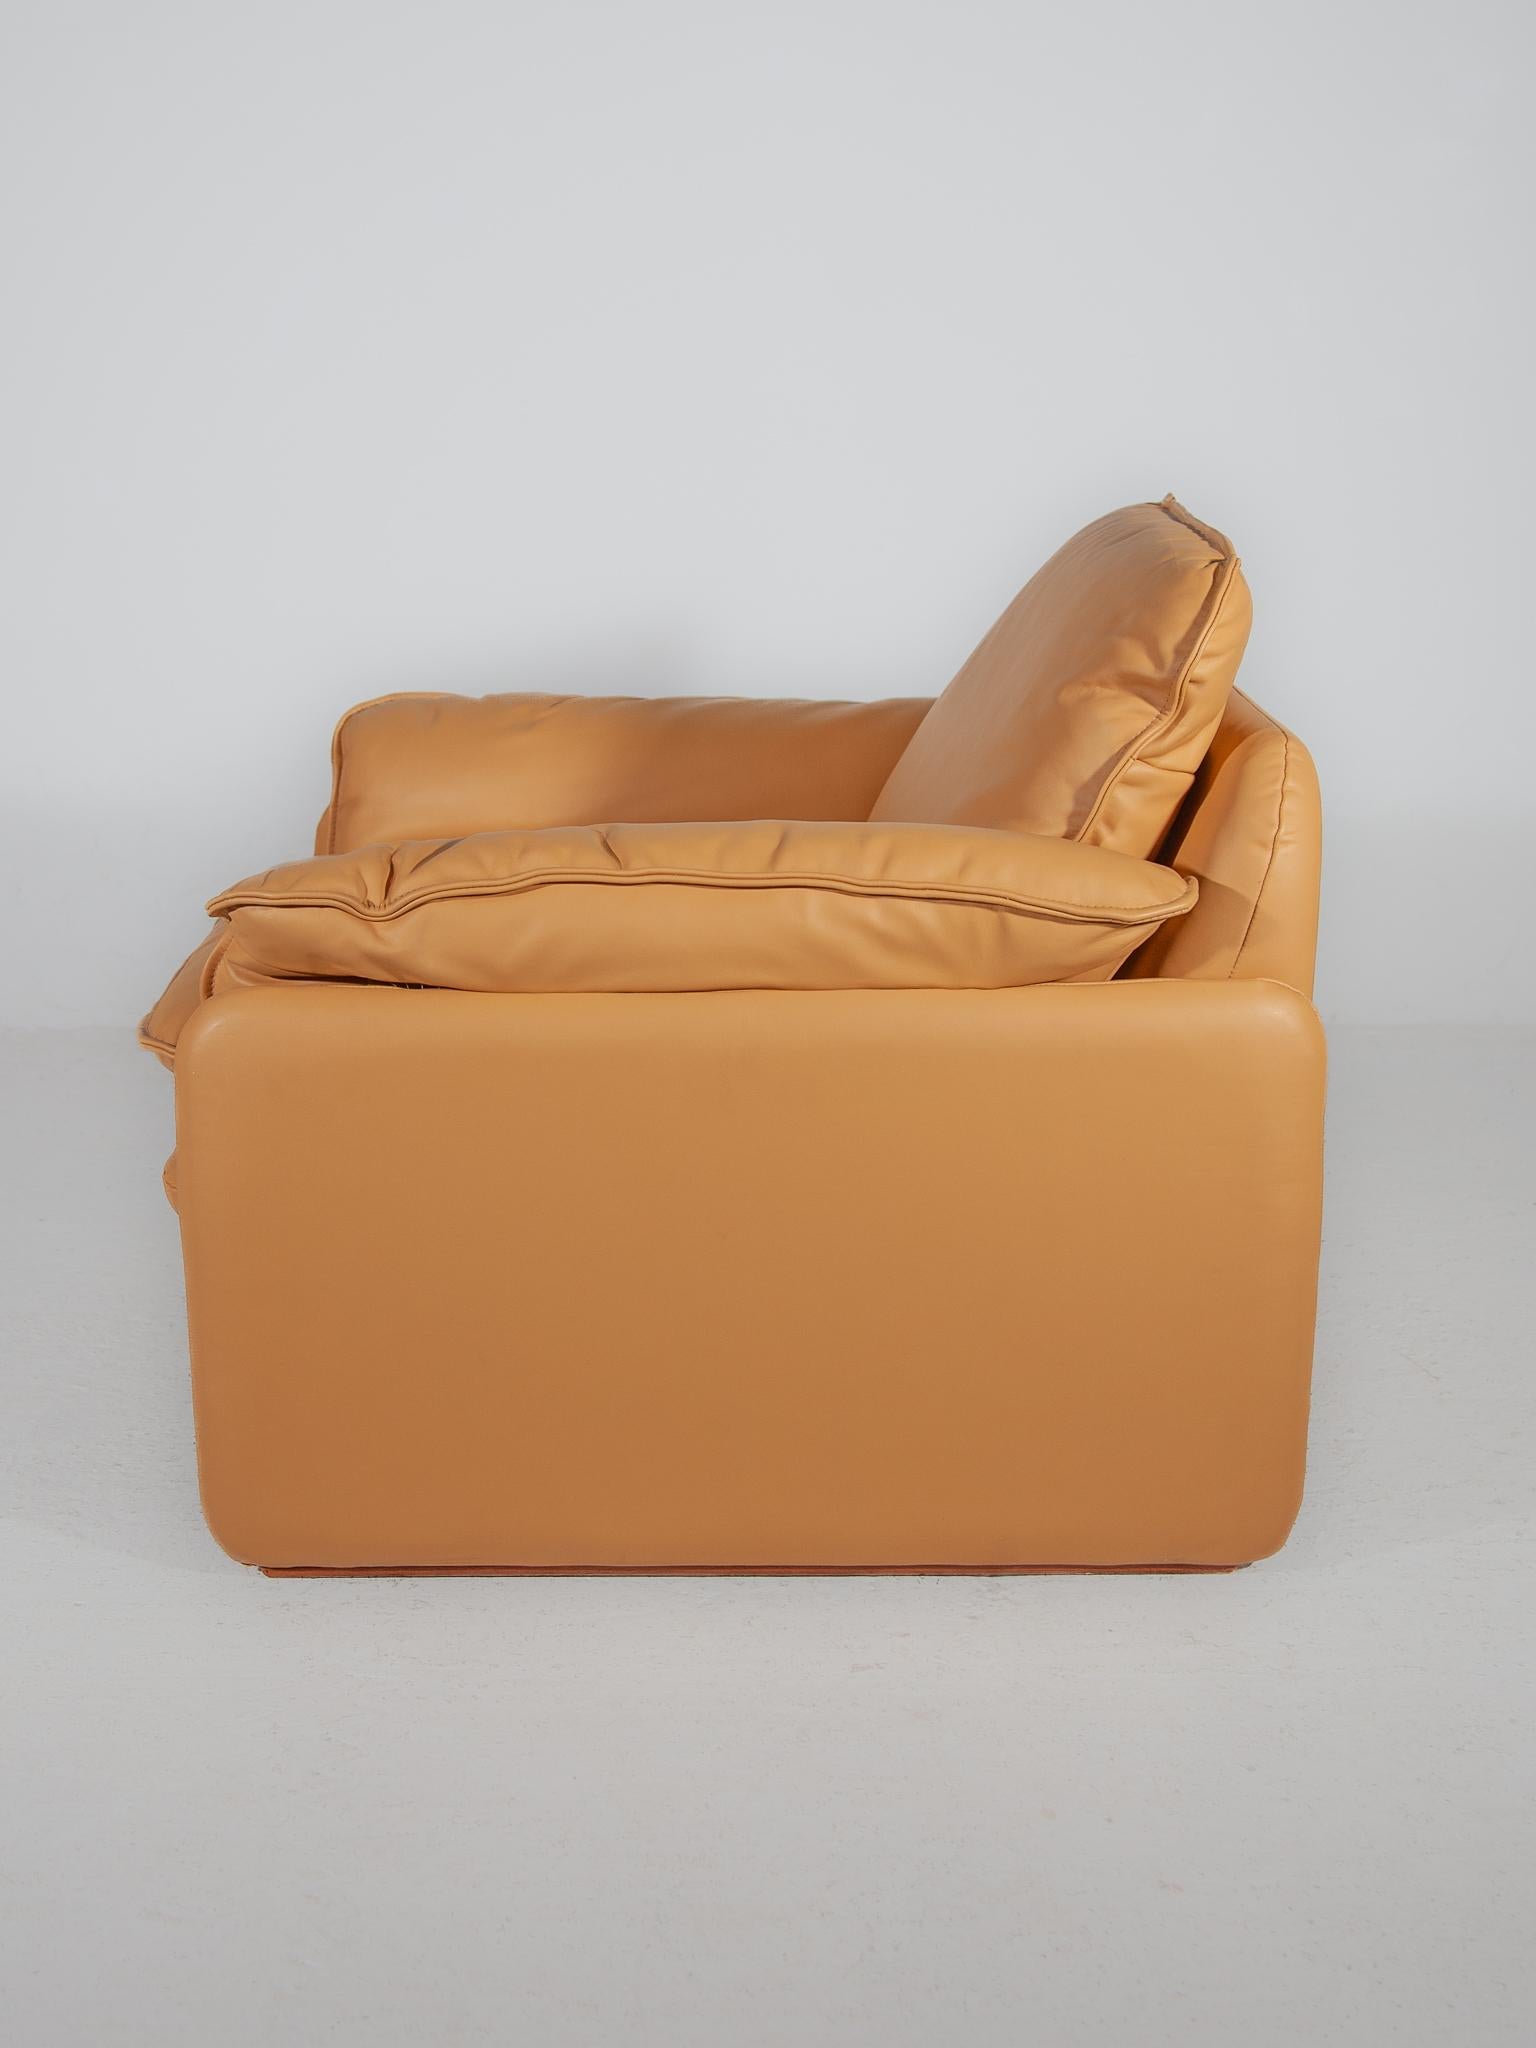 Set of 2 Ds-61 Armchairs Camel Leather designed by De Sede, 1970s For Sale 2